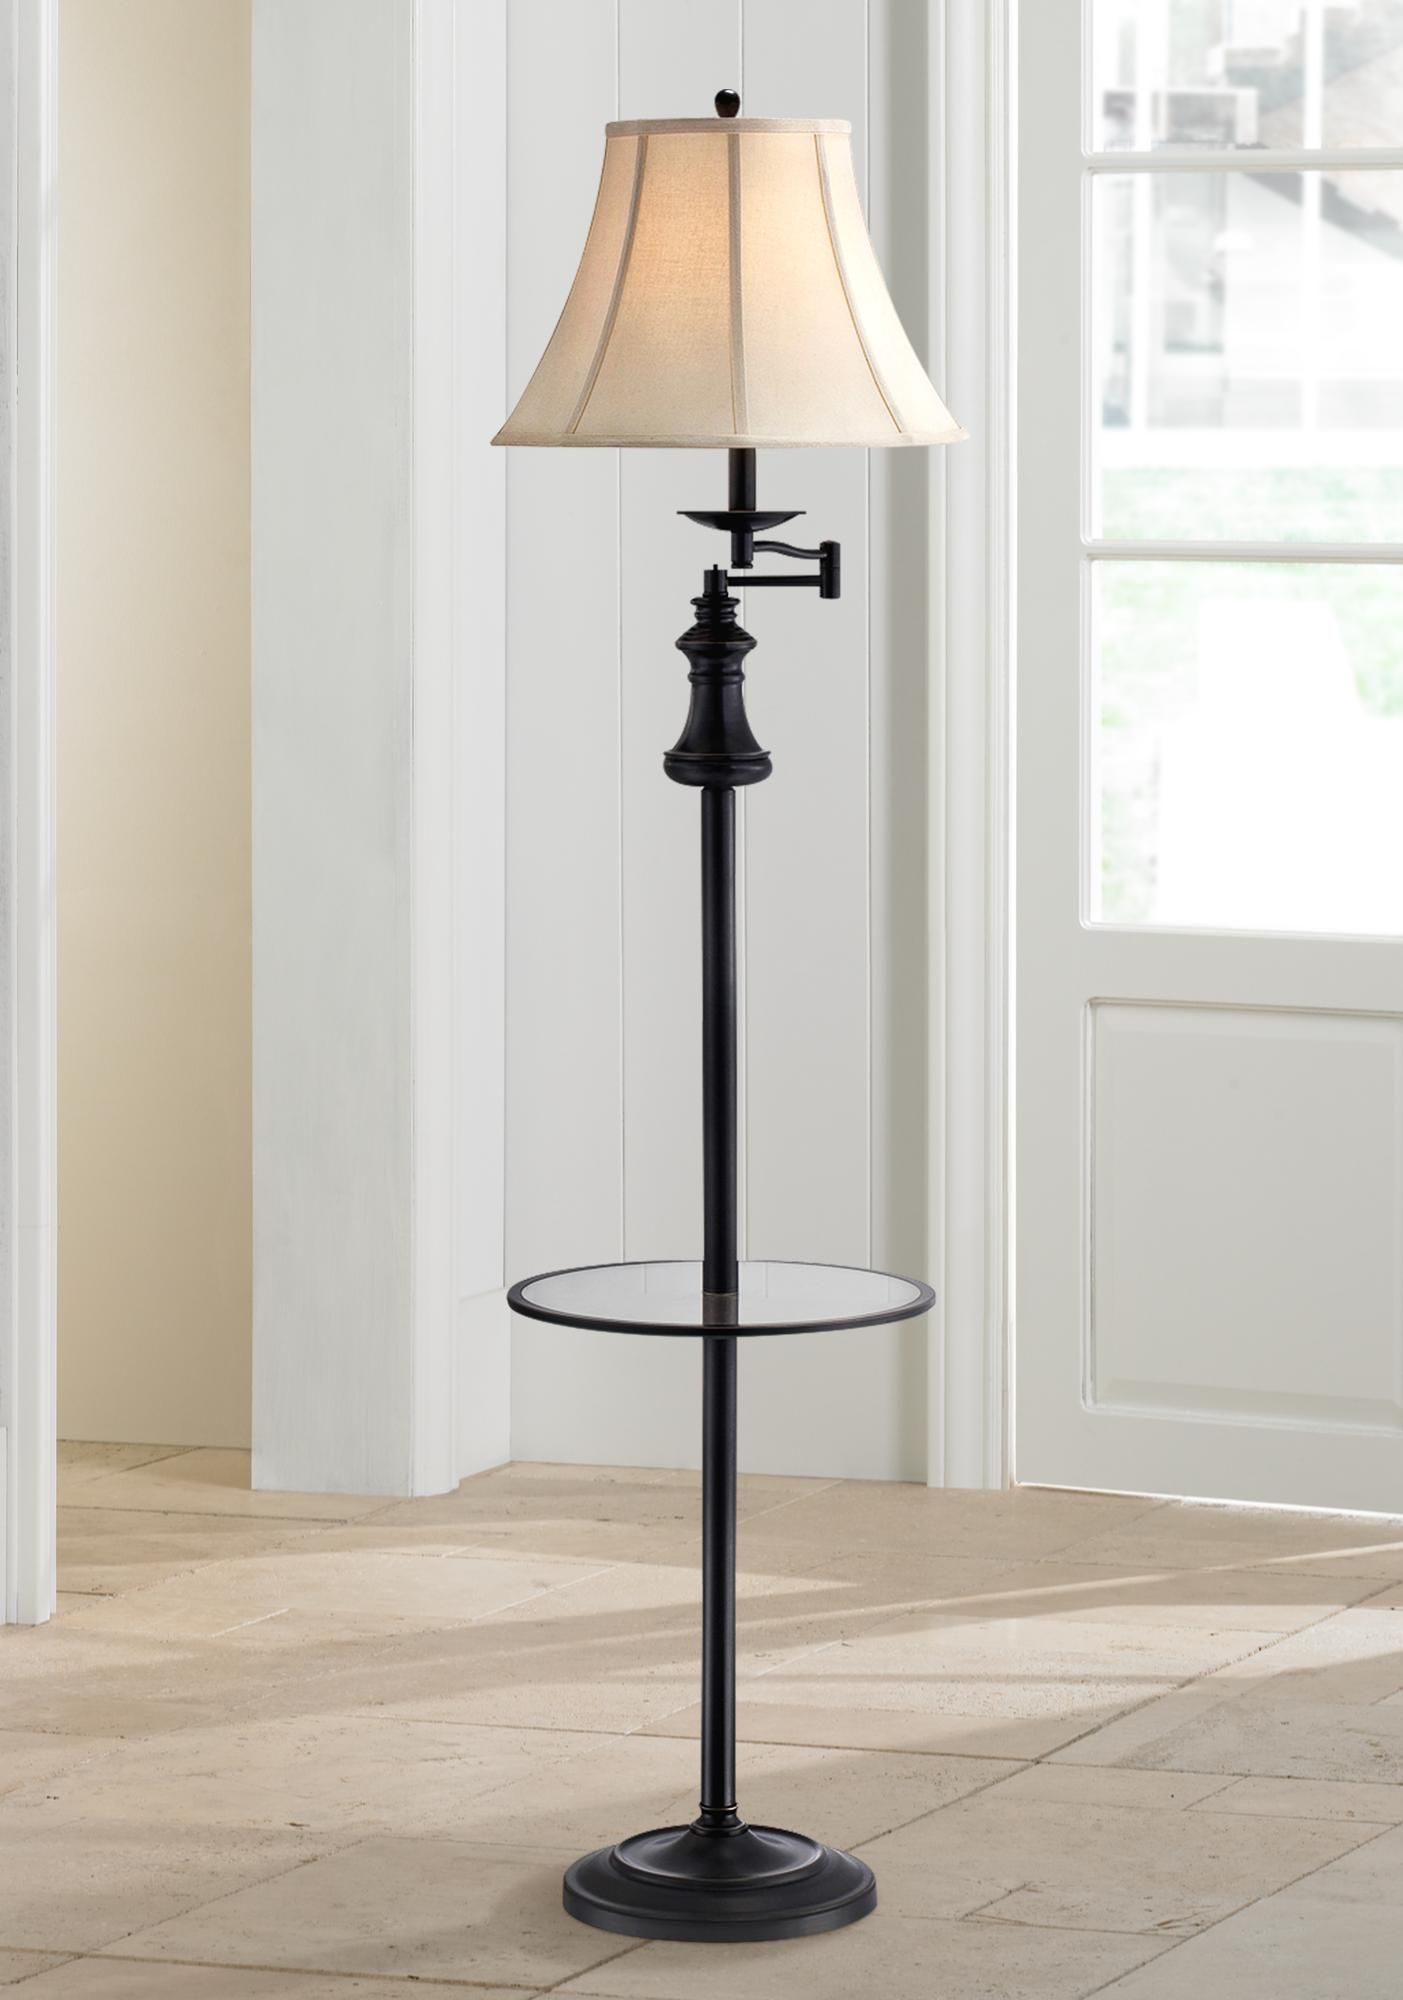 Lite Source Brandice Swing Arm Floor Lamp With Table Tray throughout dimensions 1403 X 2000